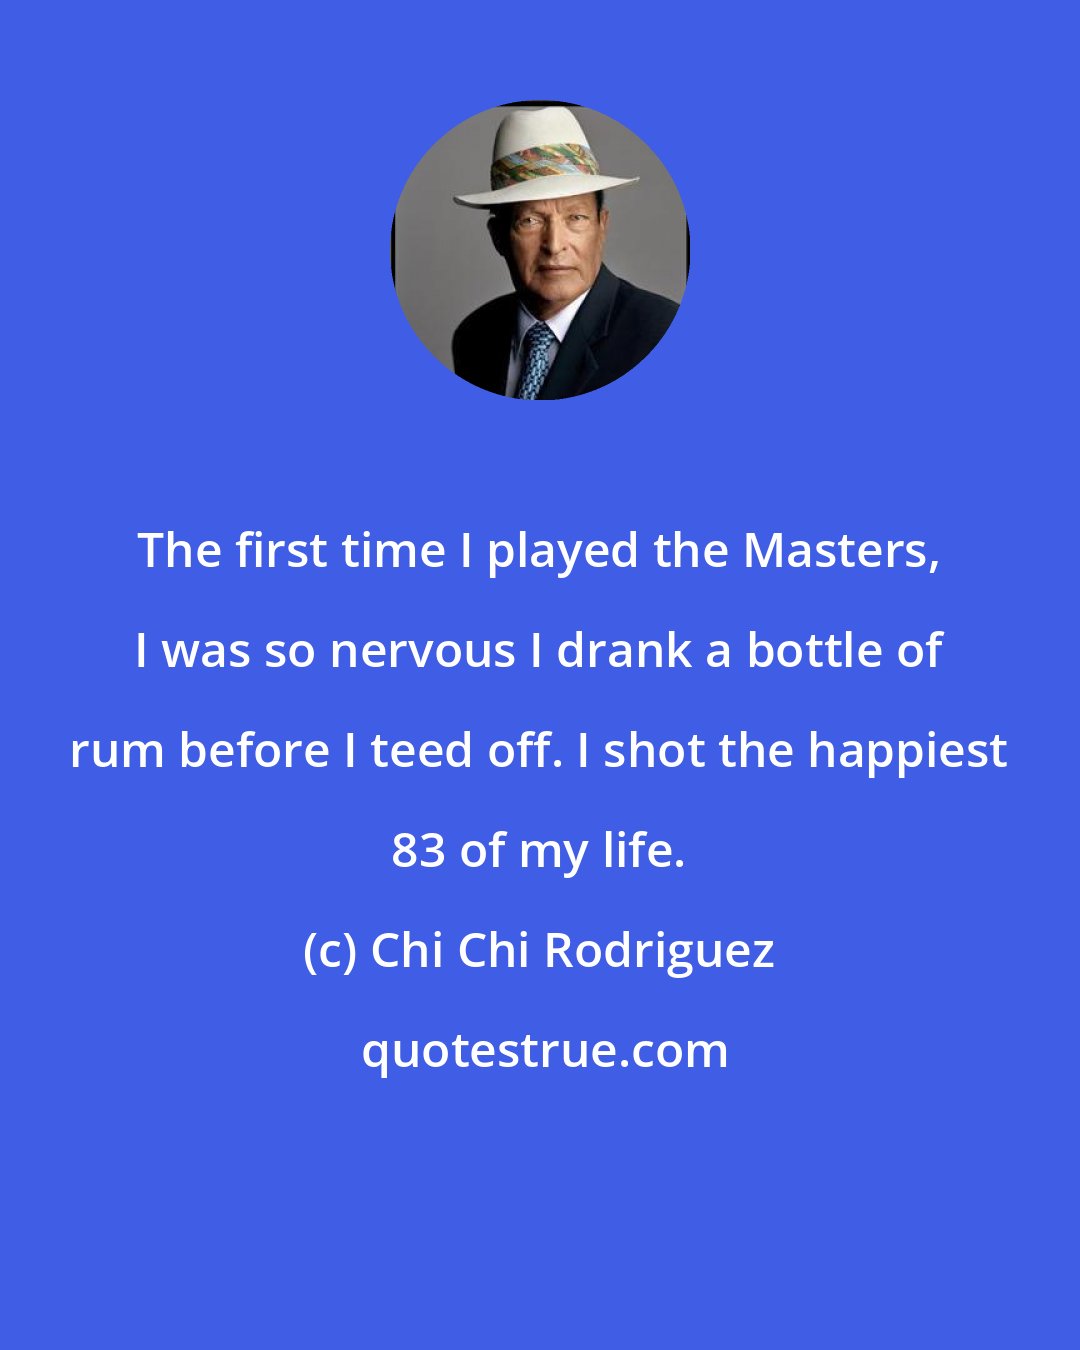 Chi Chi Rodriguez: The first time I played the Masters, I was so nervous I drank a bottle of rum before I teed off. I shot the happiest 83 of my life.